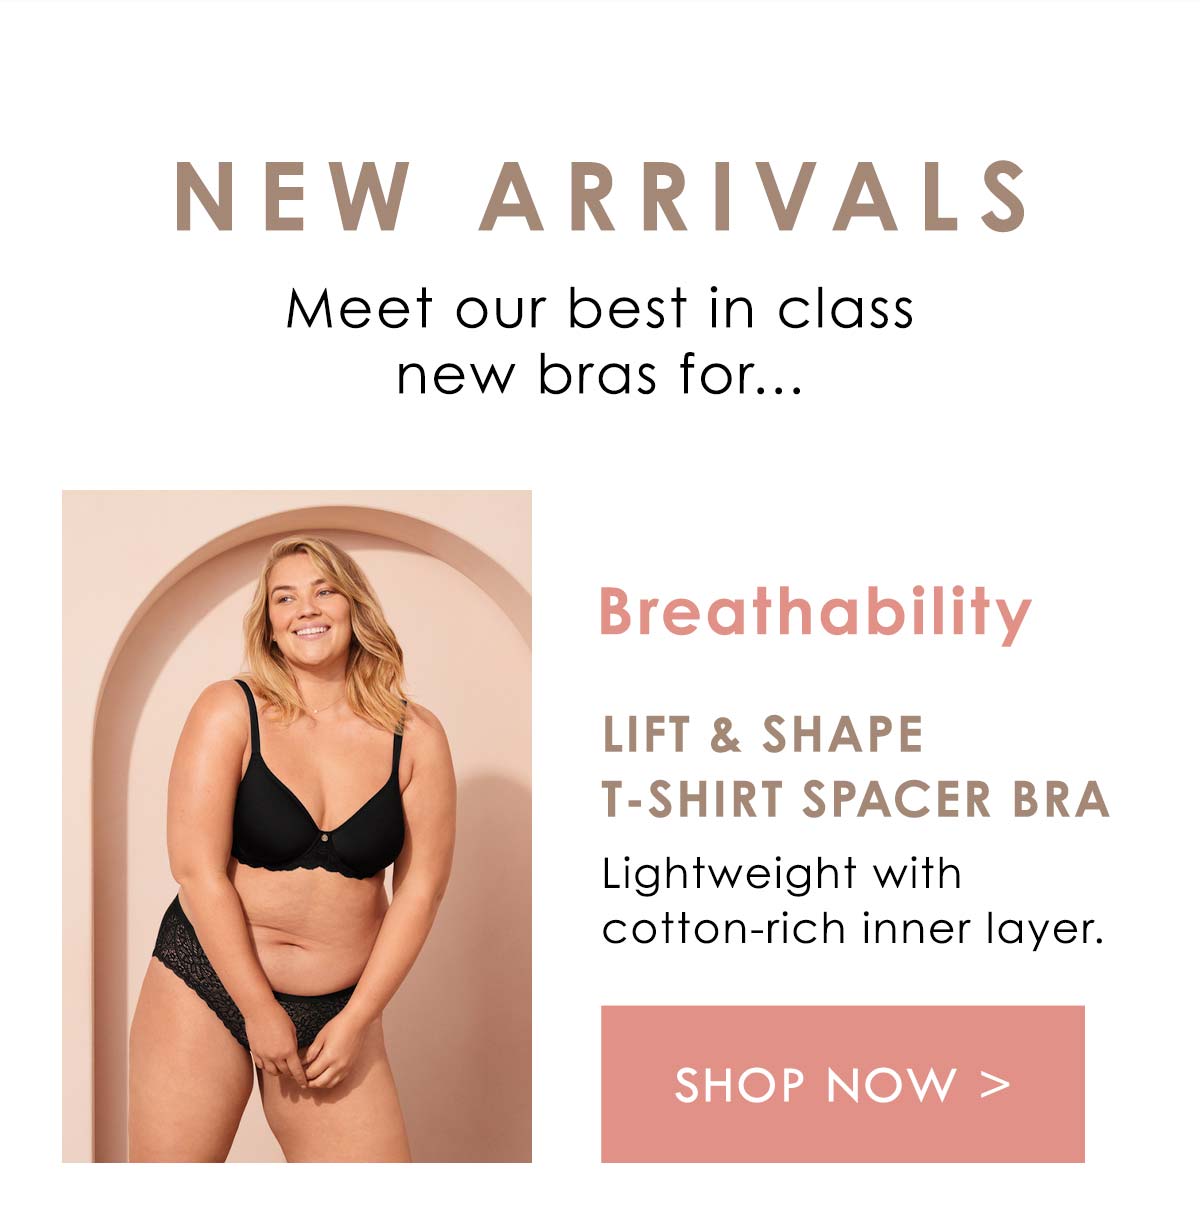 New Arrivals. Meet our best in class new bras for... Breathability. Lift and Shape T-Shirt Spacer Bra. Lightweight with cotton-rich inner layer. Shop Now.